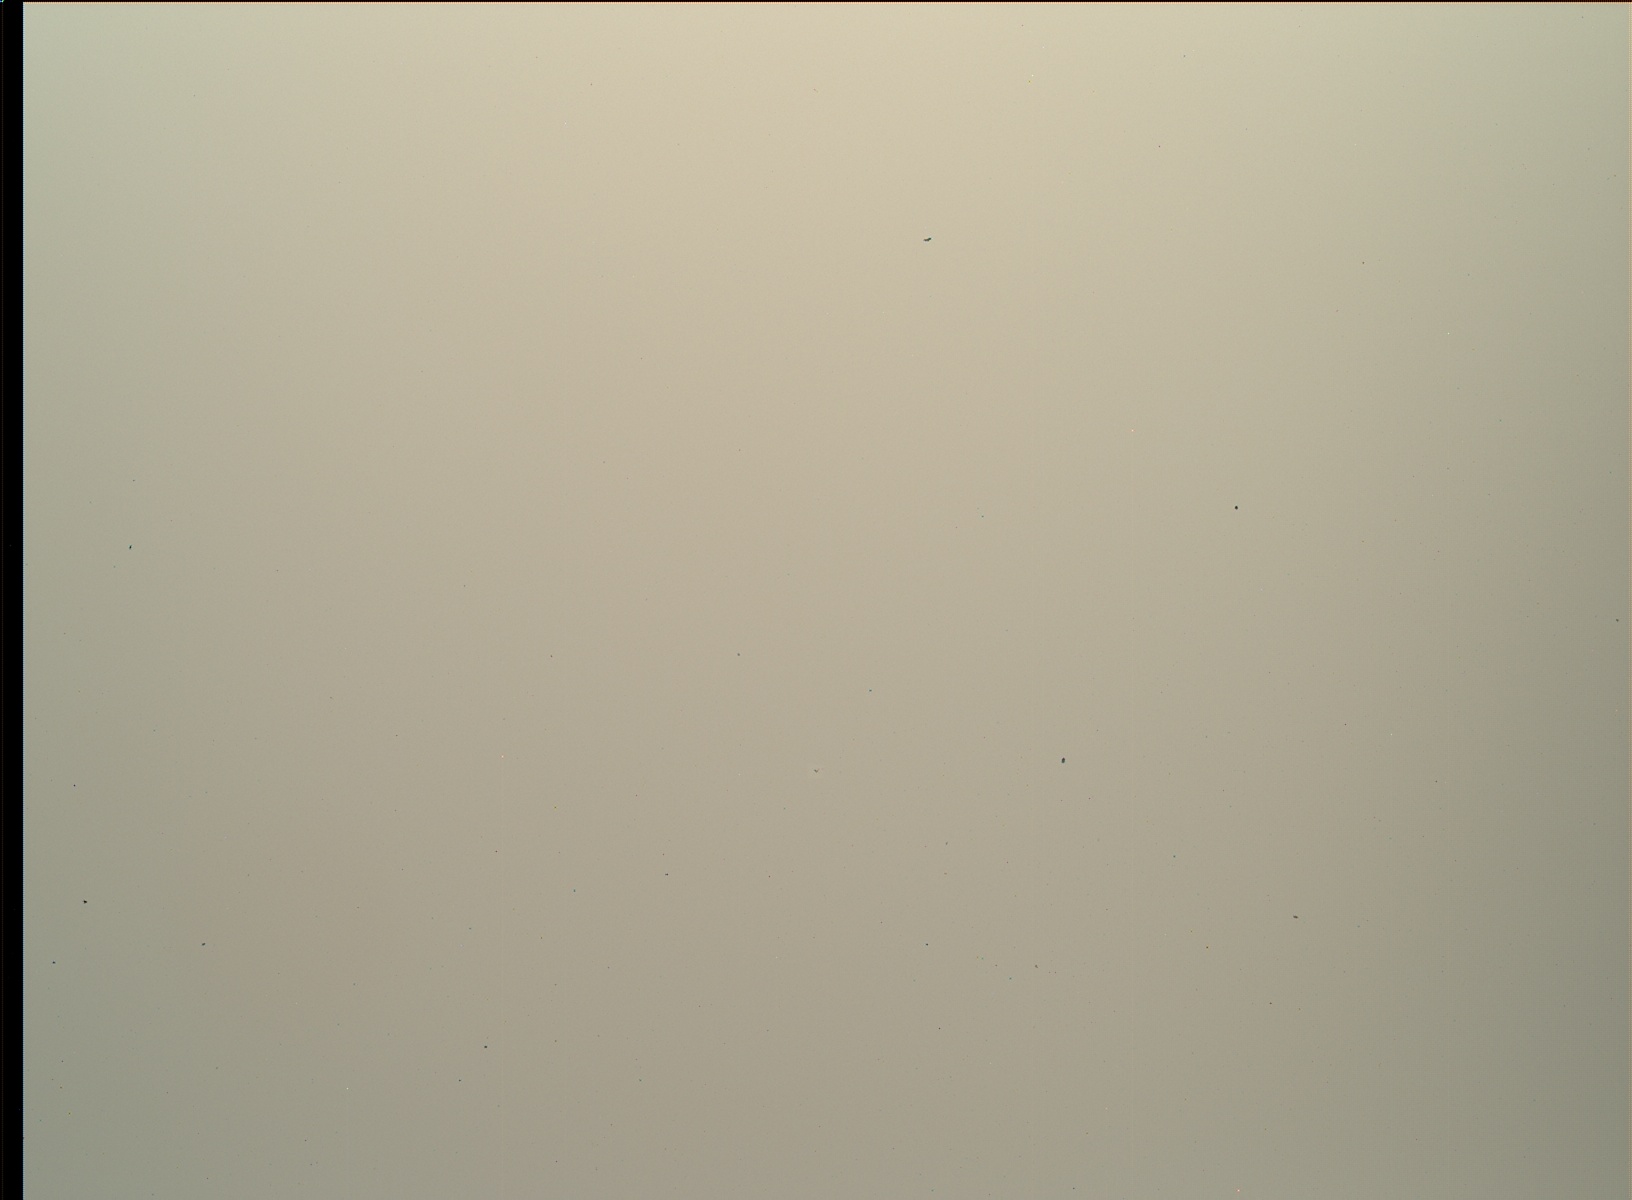 Nasa's Mars rover Curiosity acquired this image using its Mars Hand Lens Imager (MAHLI) on Sol 653